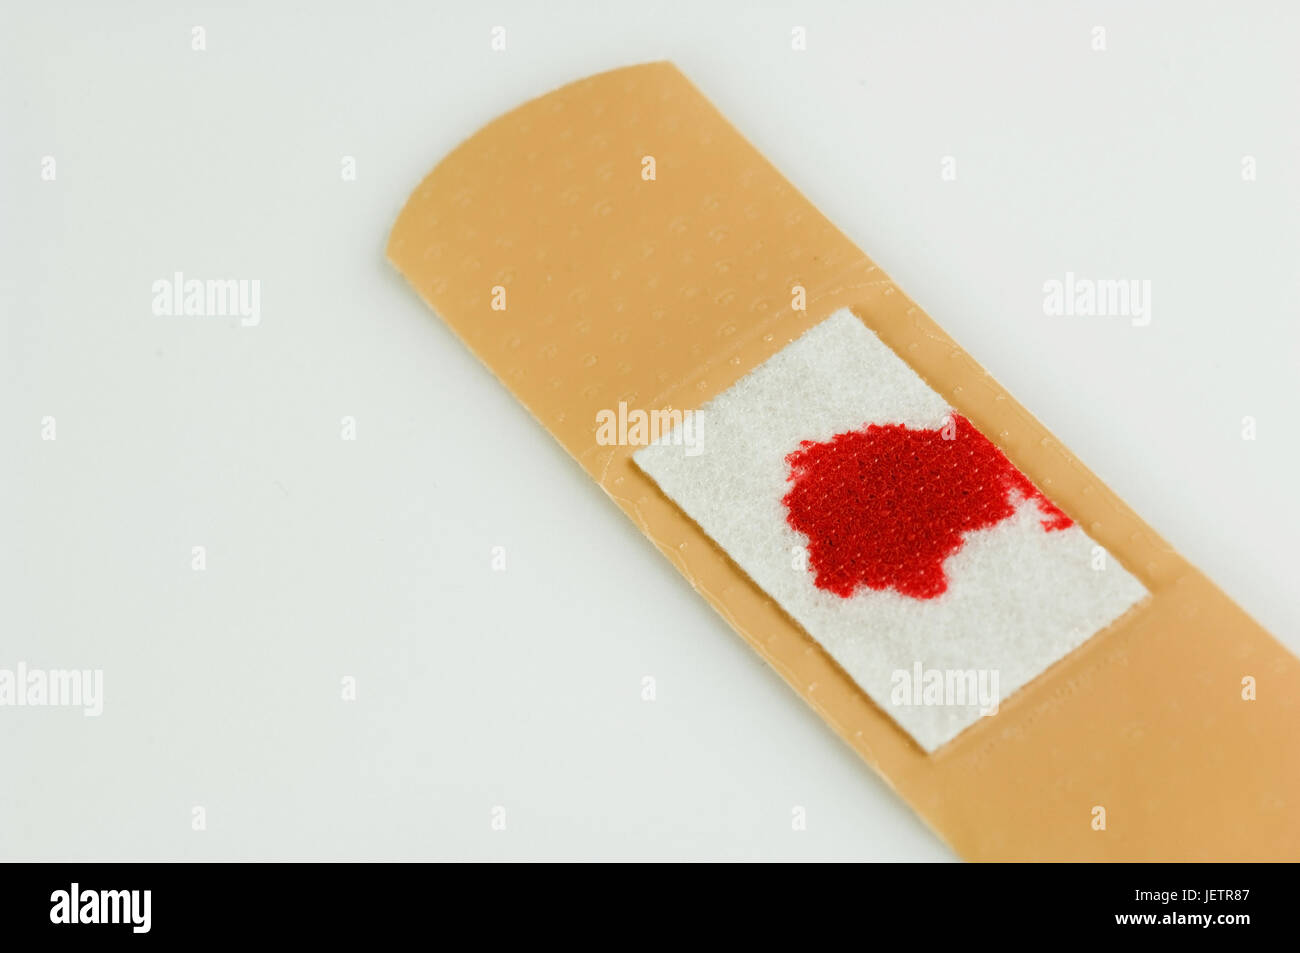 Used sticking plaster with bloodstain, Gebrauchtes Heftpflaster mit Blutfleck Stock Photo